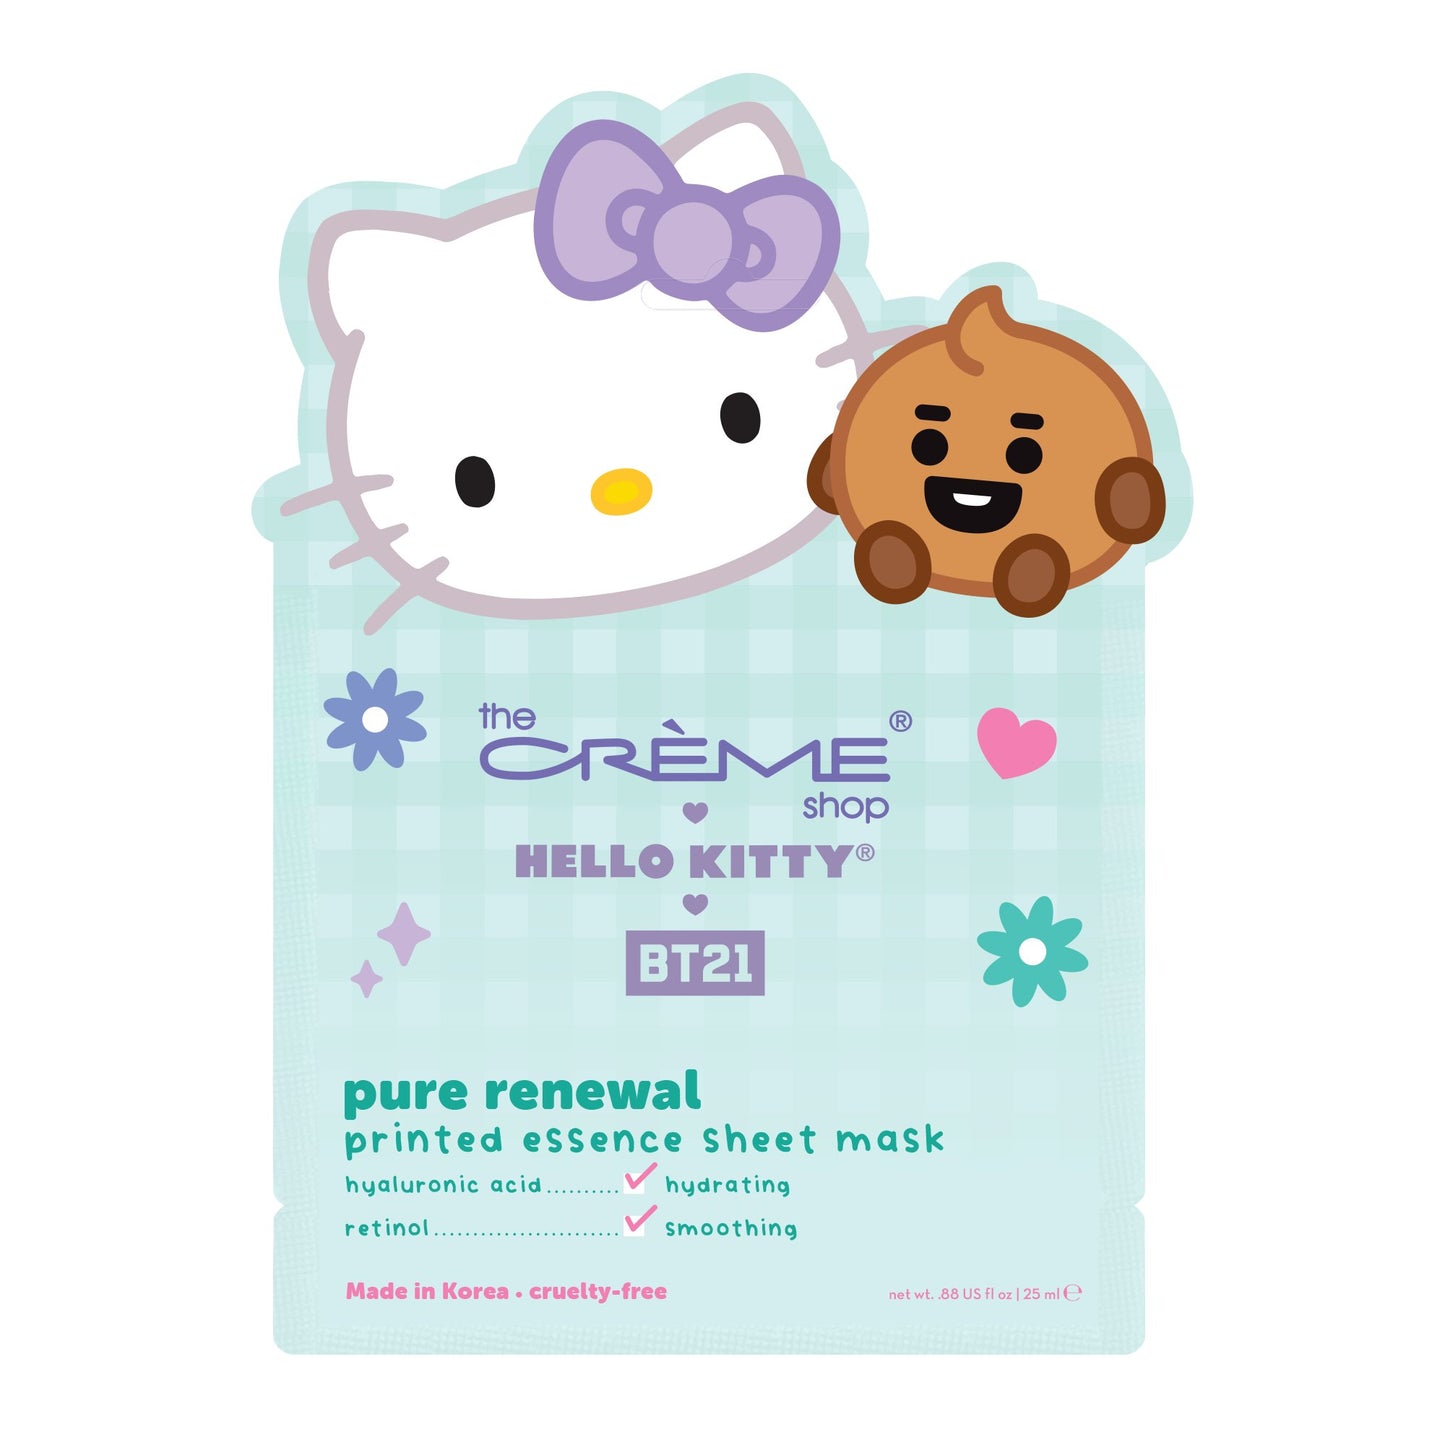 Hydrating and Smoothing Hello Kitty & BT21 Pure Renewal Printed Essence Sheet Mask, $4